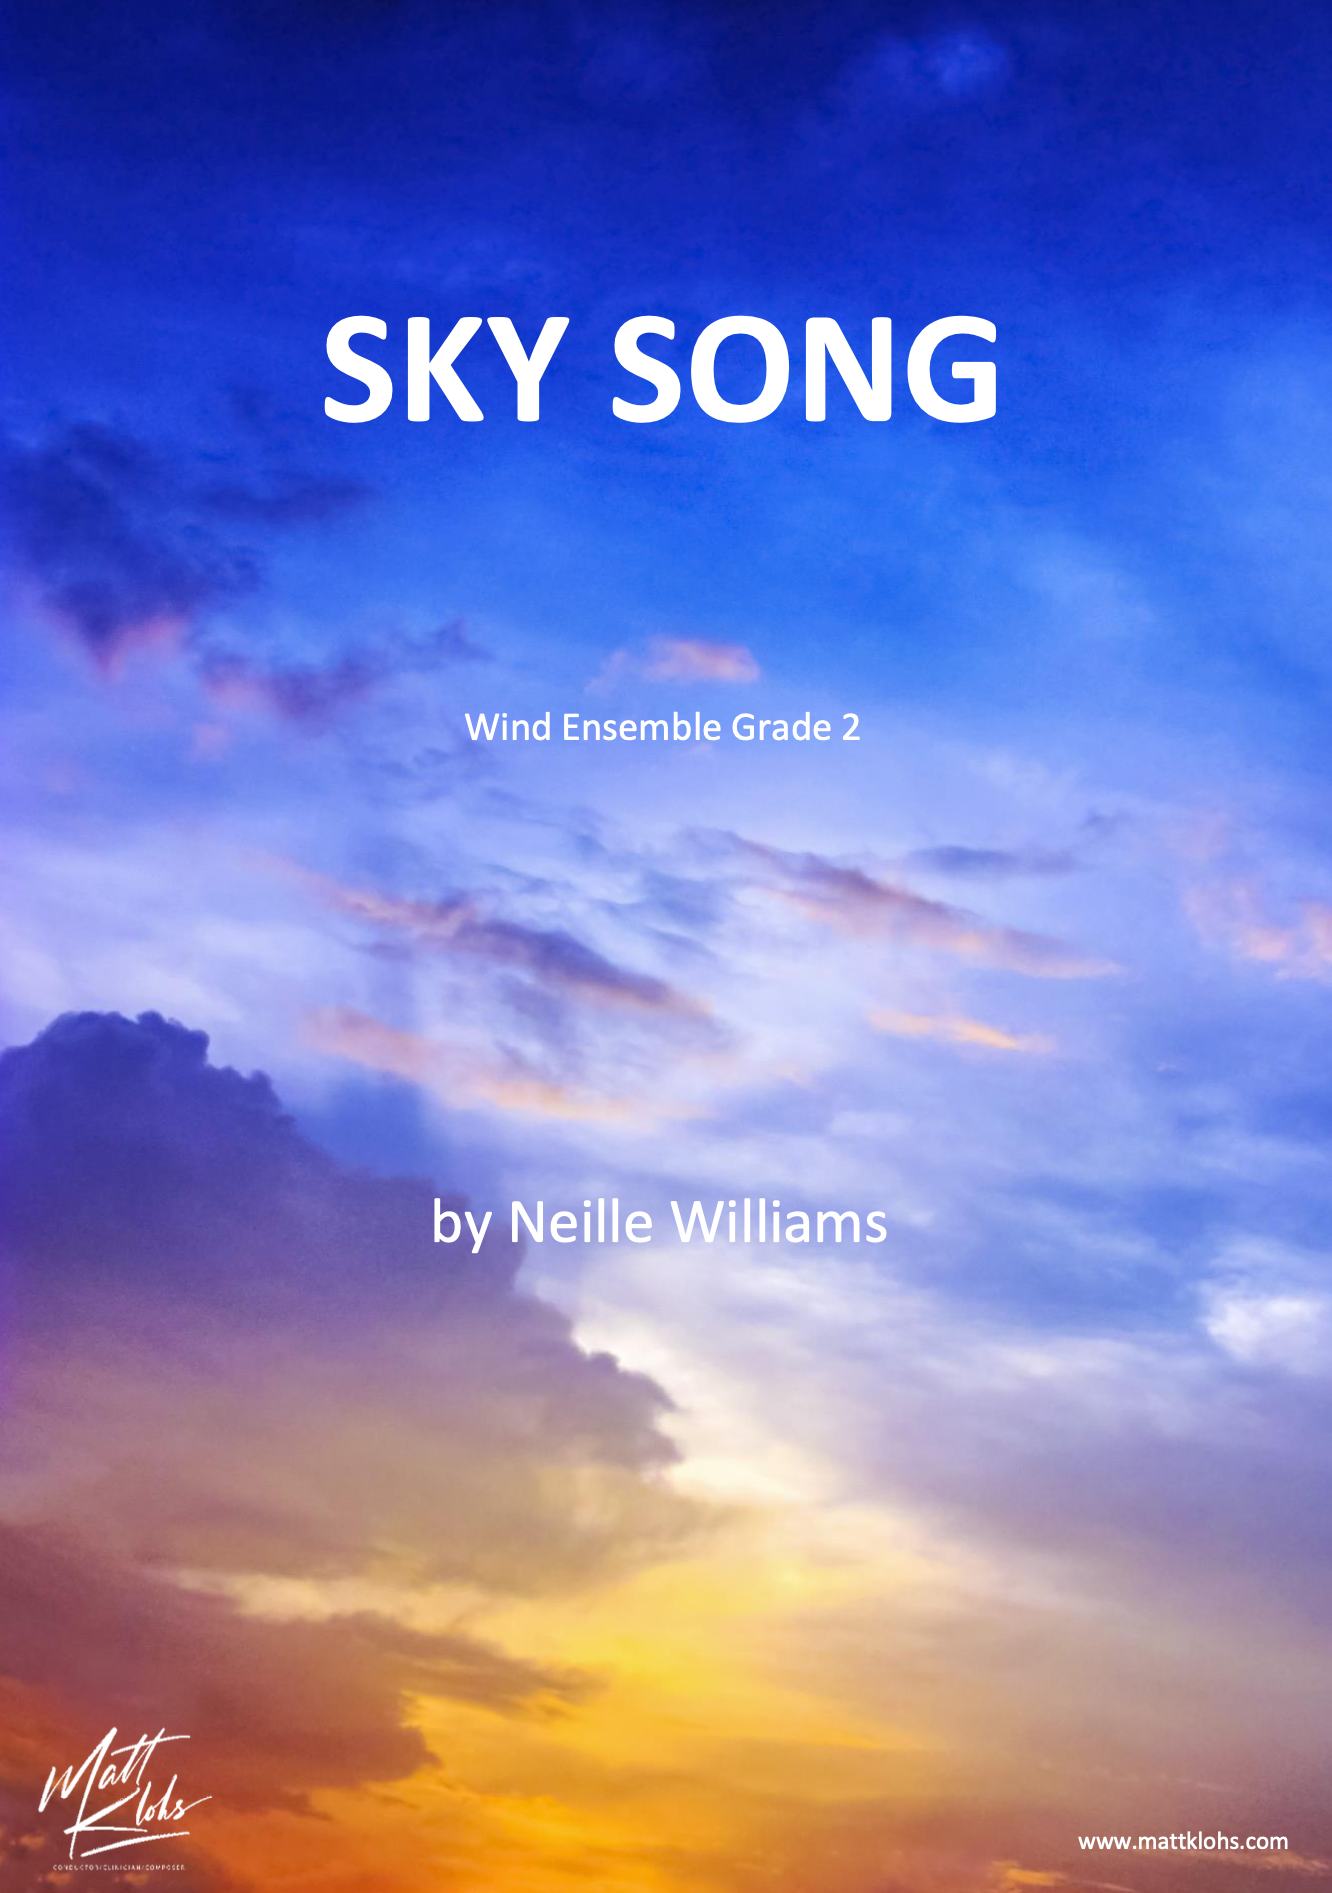 Sky Song by Nellie Williams